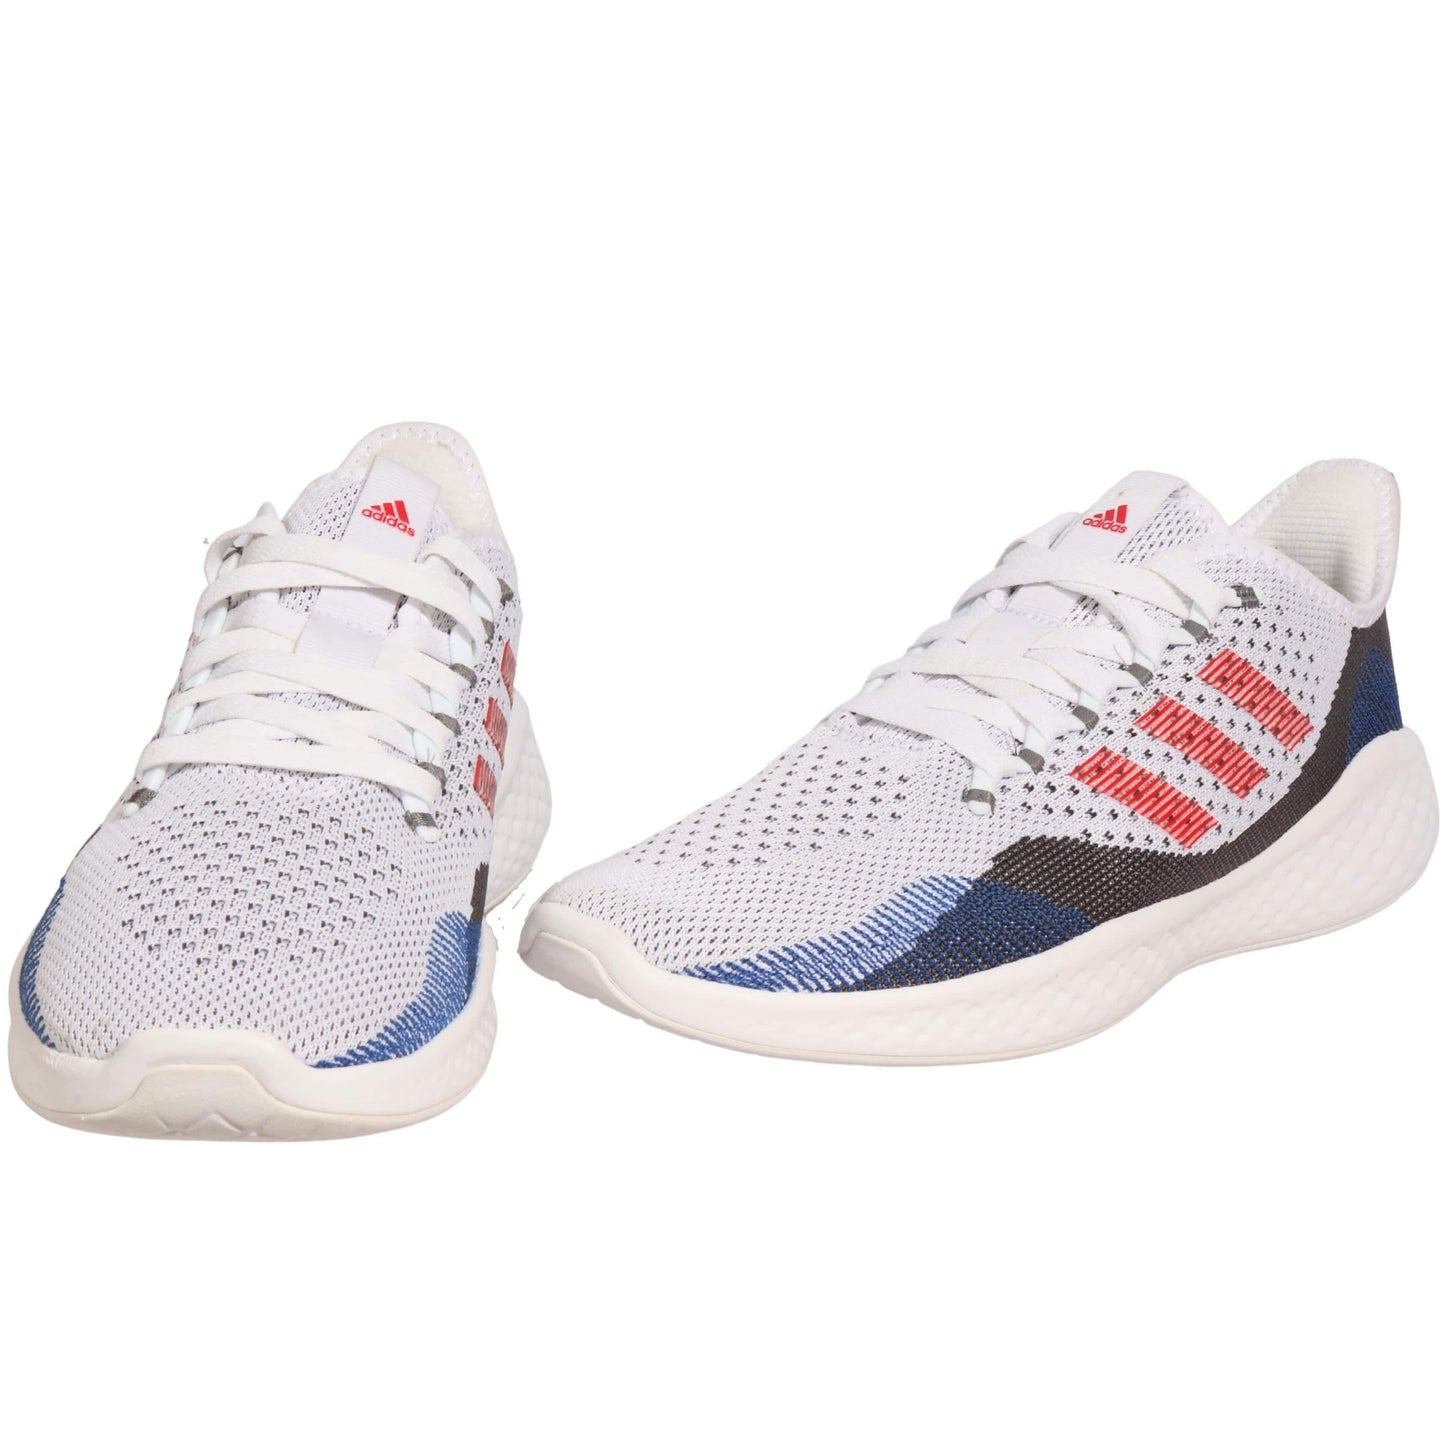 ADIDAS Athletic Shoes 42.5 / White ADIDAS - Fluidflow 2.0 Running Shoes